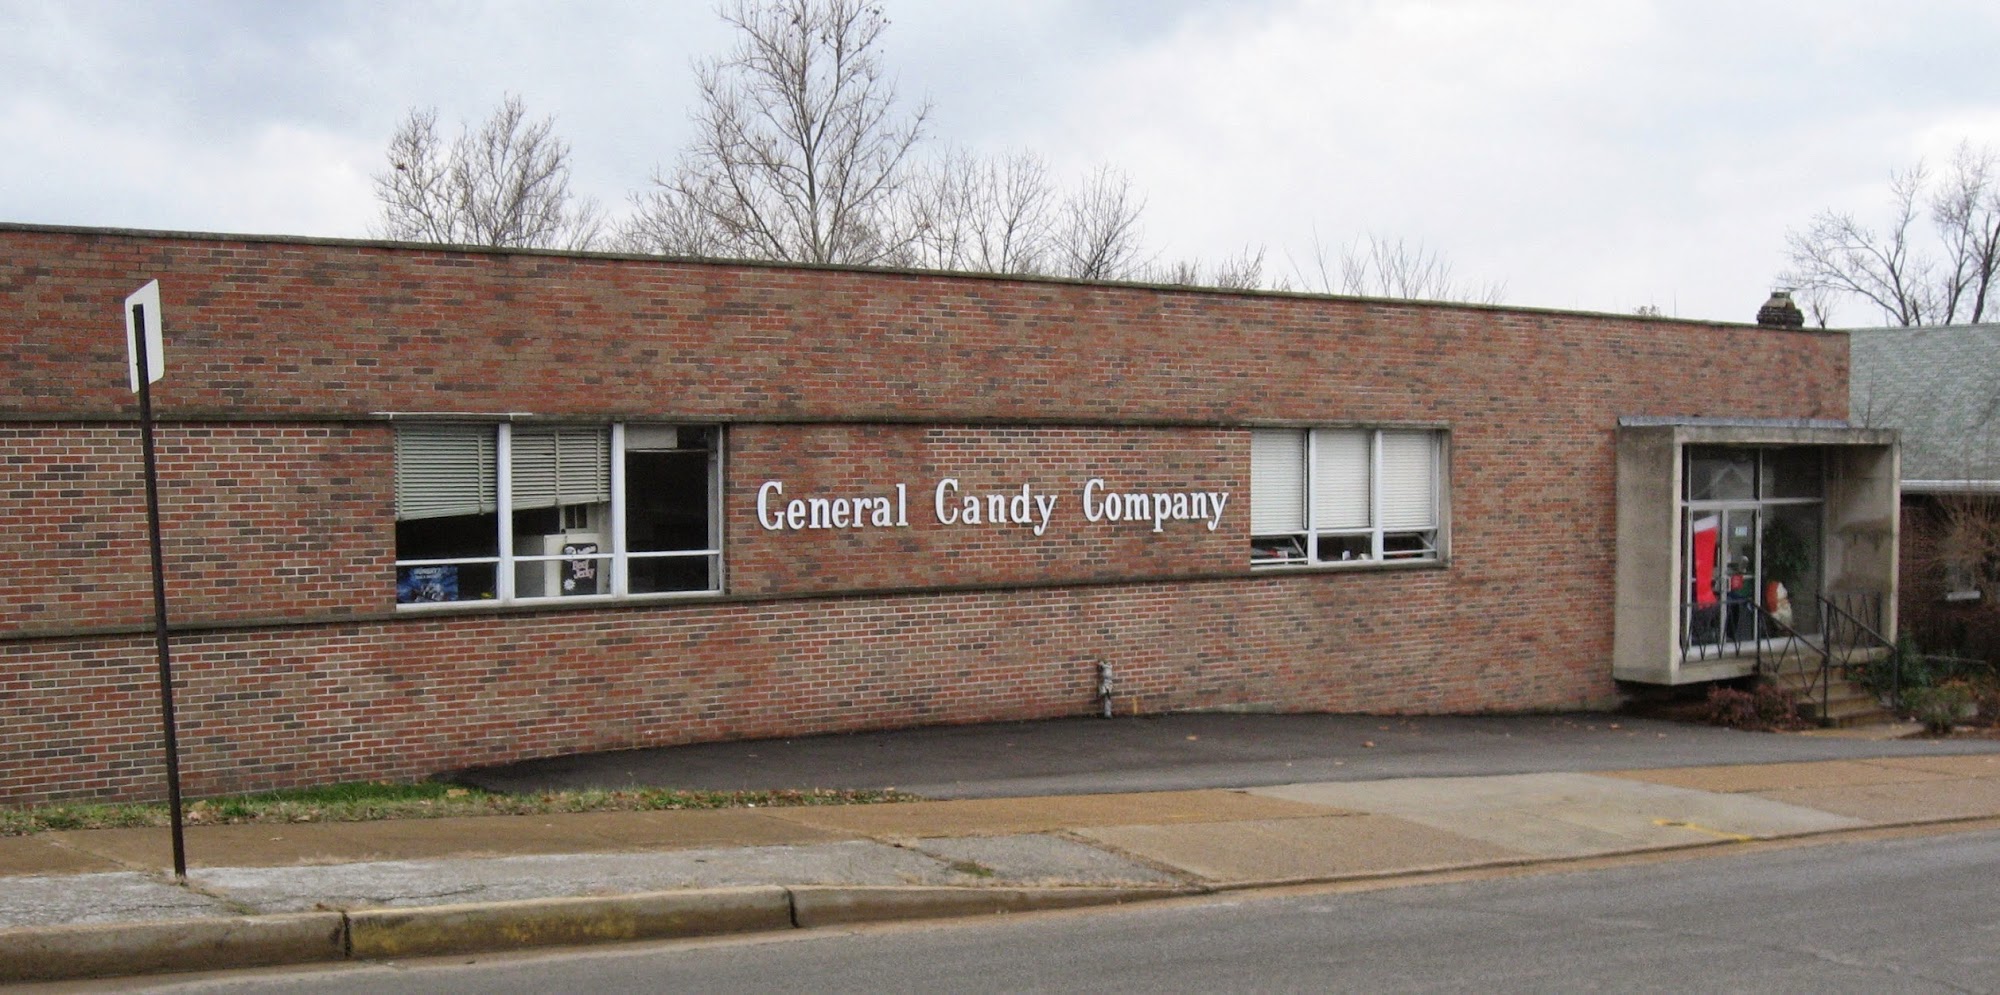 General Candy Company